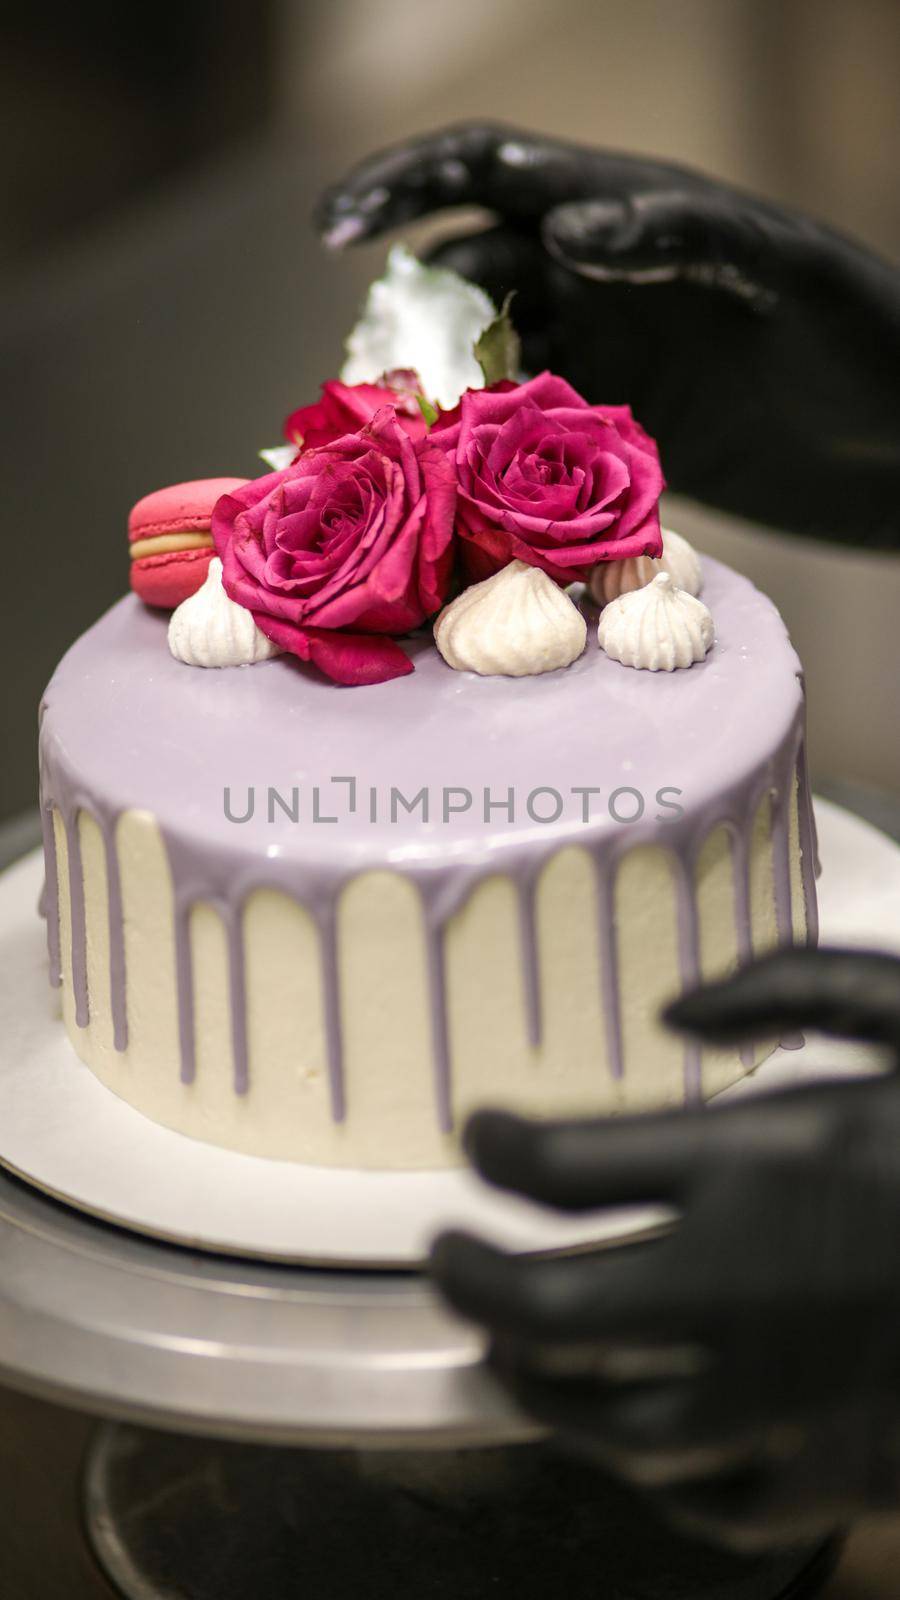 chef usign macaron , flowers and text sign for a celebration cake